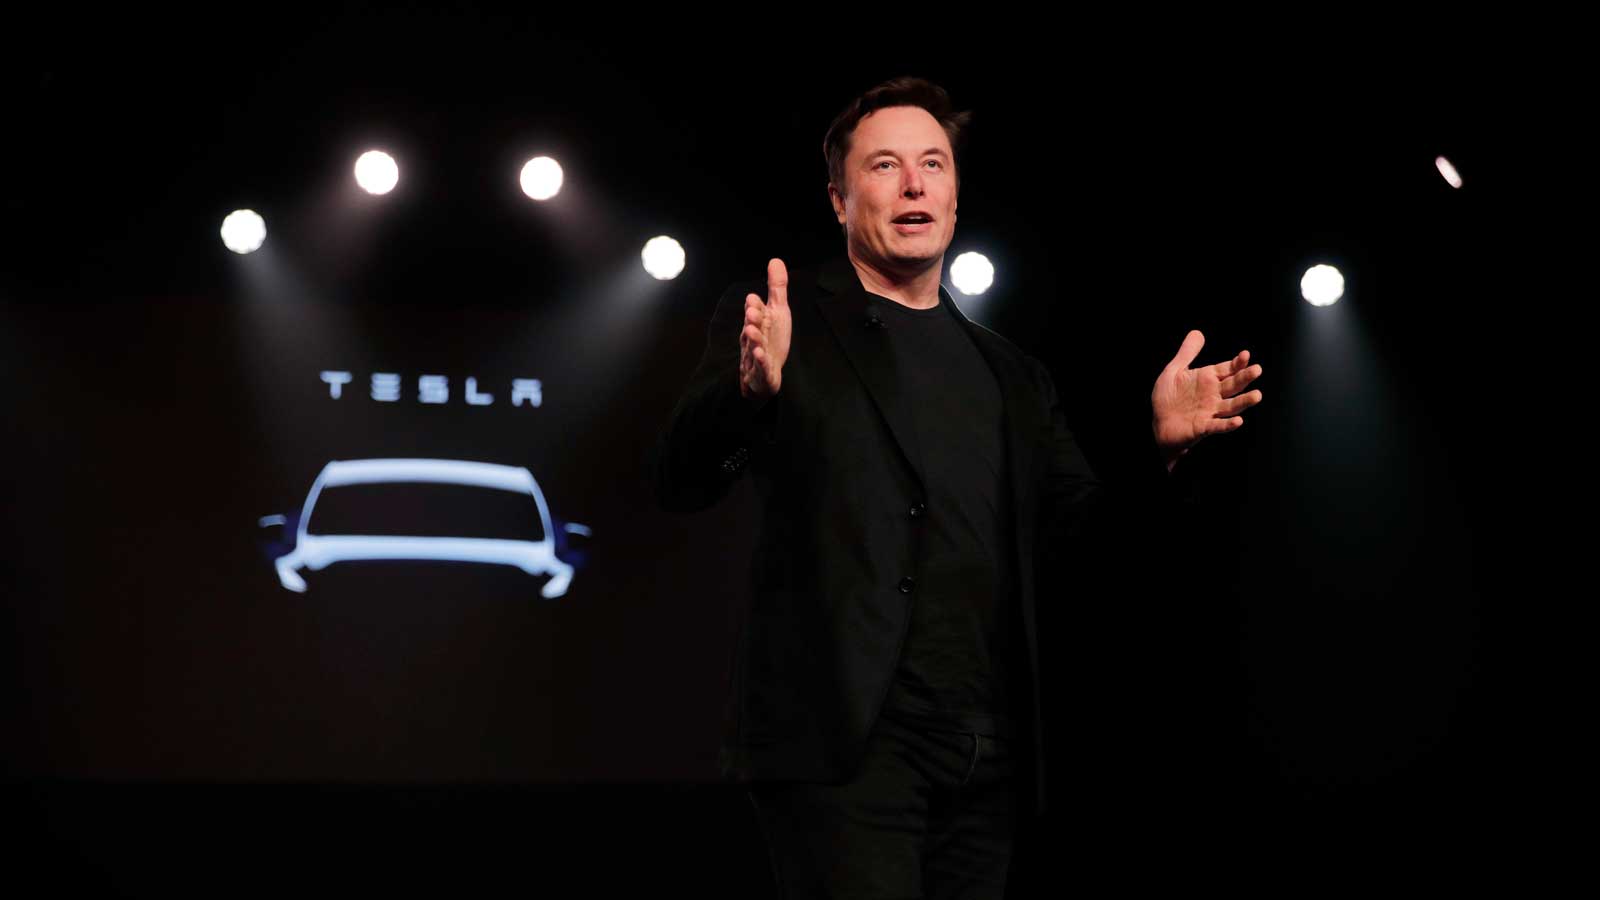 A lot of exciting news: Elon Musk reveals just how far ahead of the game Tesla is now